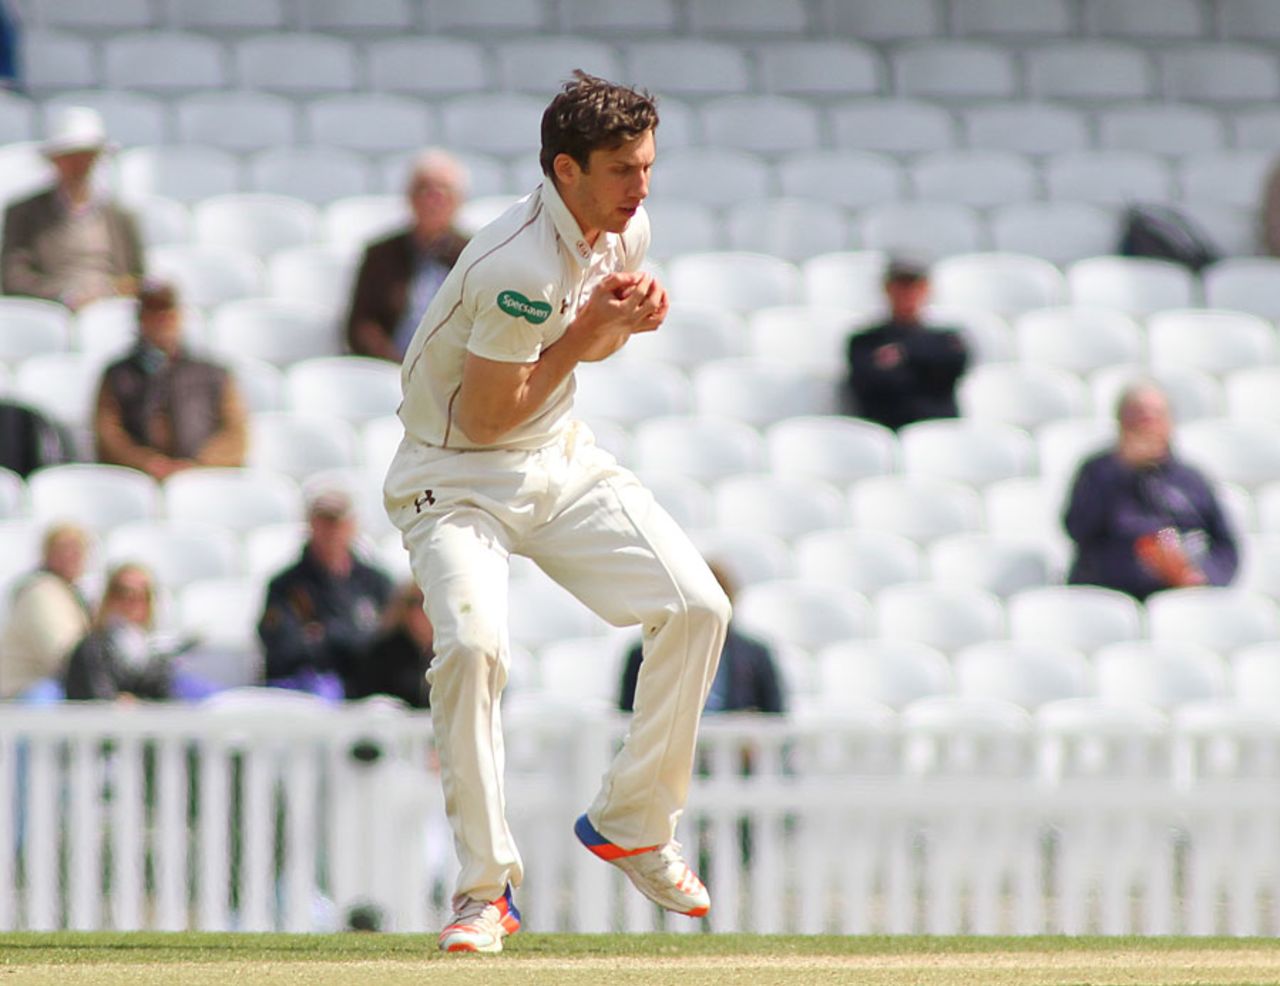 Zafar Ansari took a return catch to remove Ben Stokes, Surrey v Durham, County Championship, Division One, The Oval, 3rd day, May 3, 2016